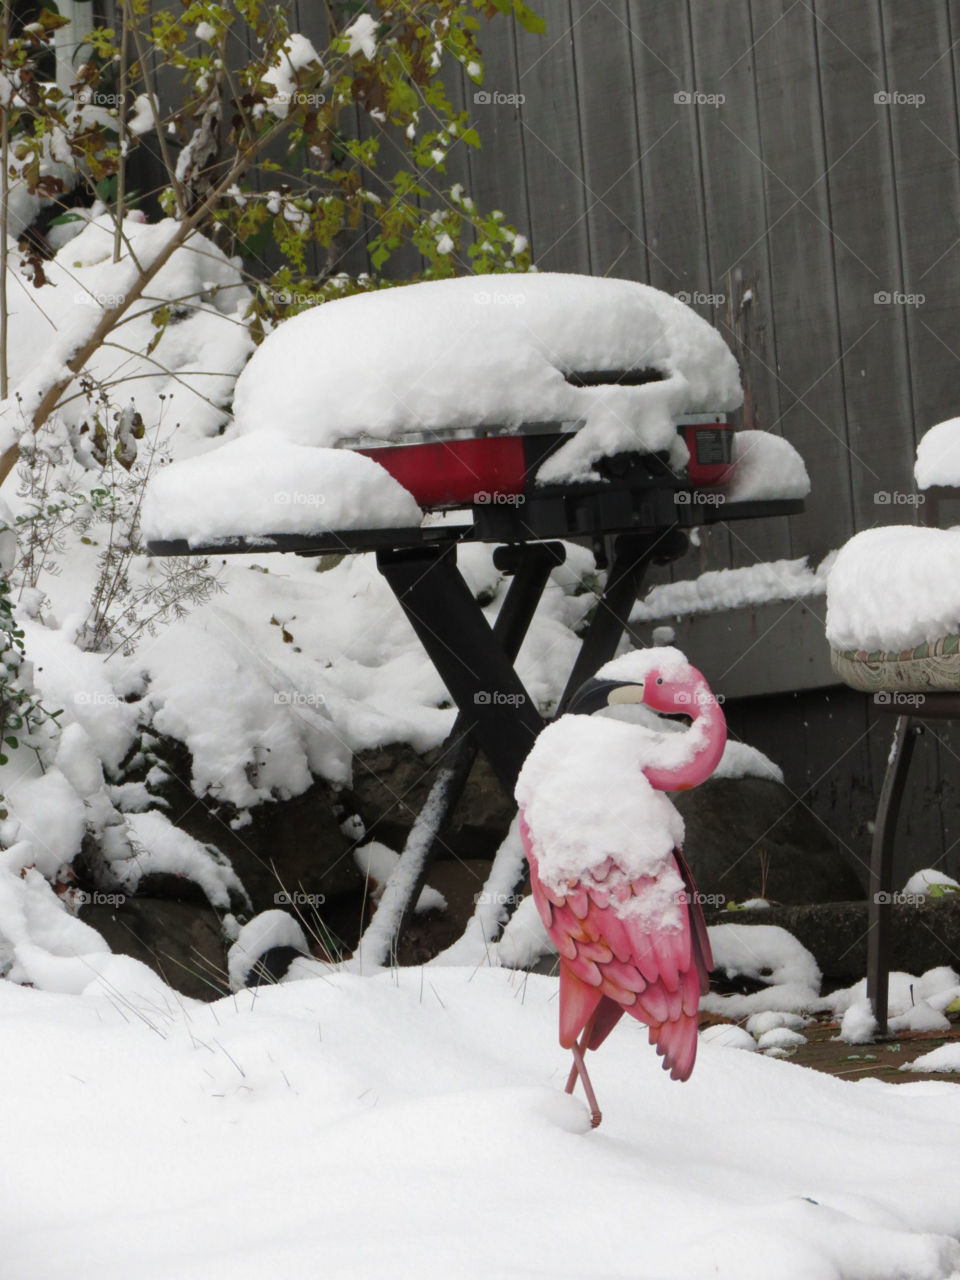 Flamingo and BBQ grill in the snow